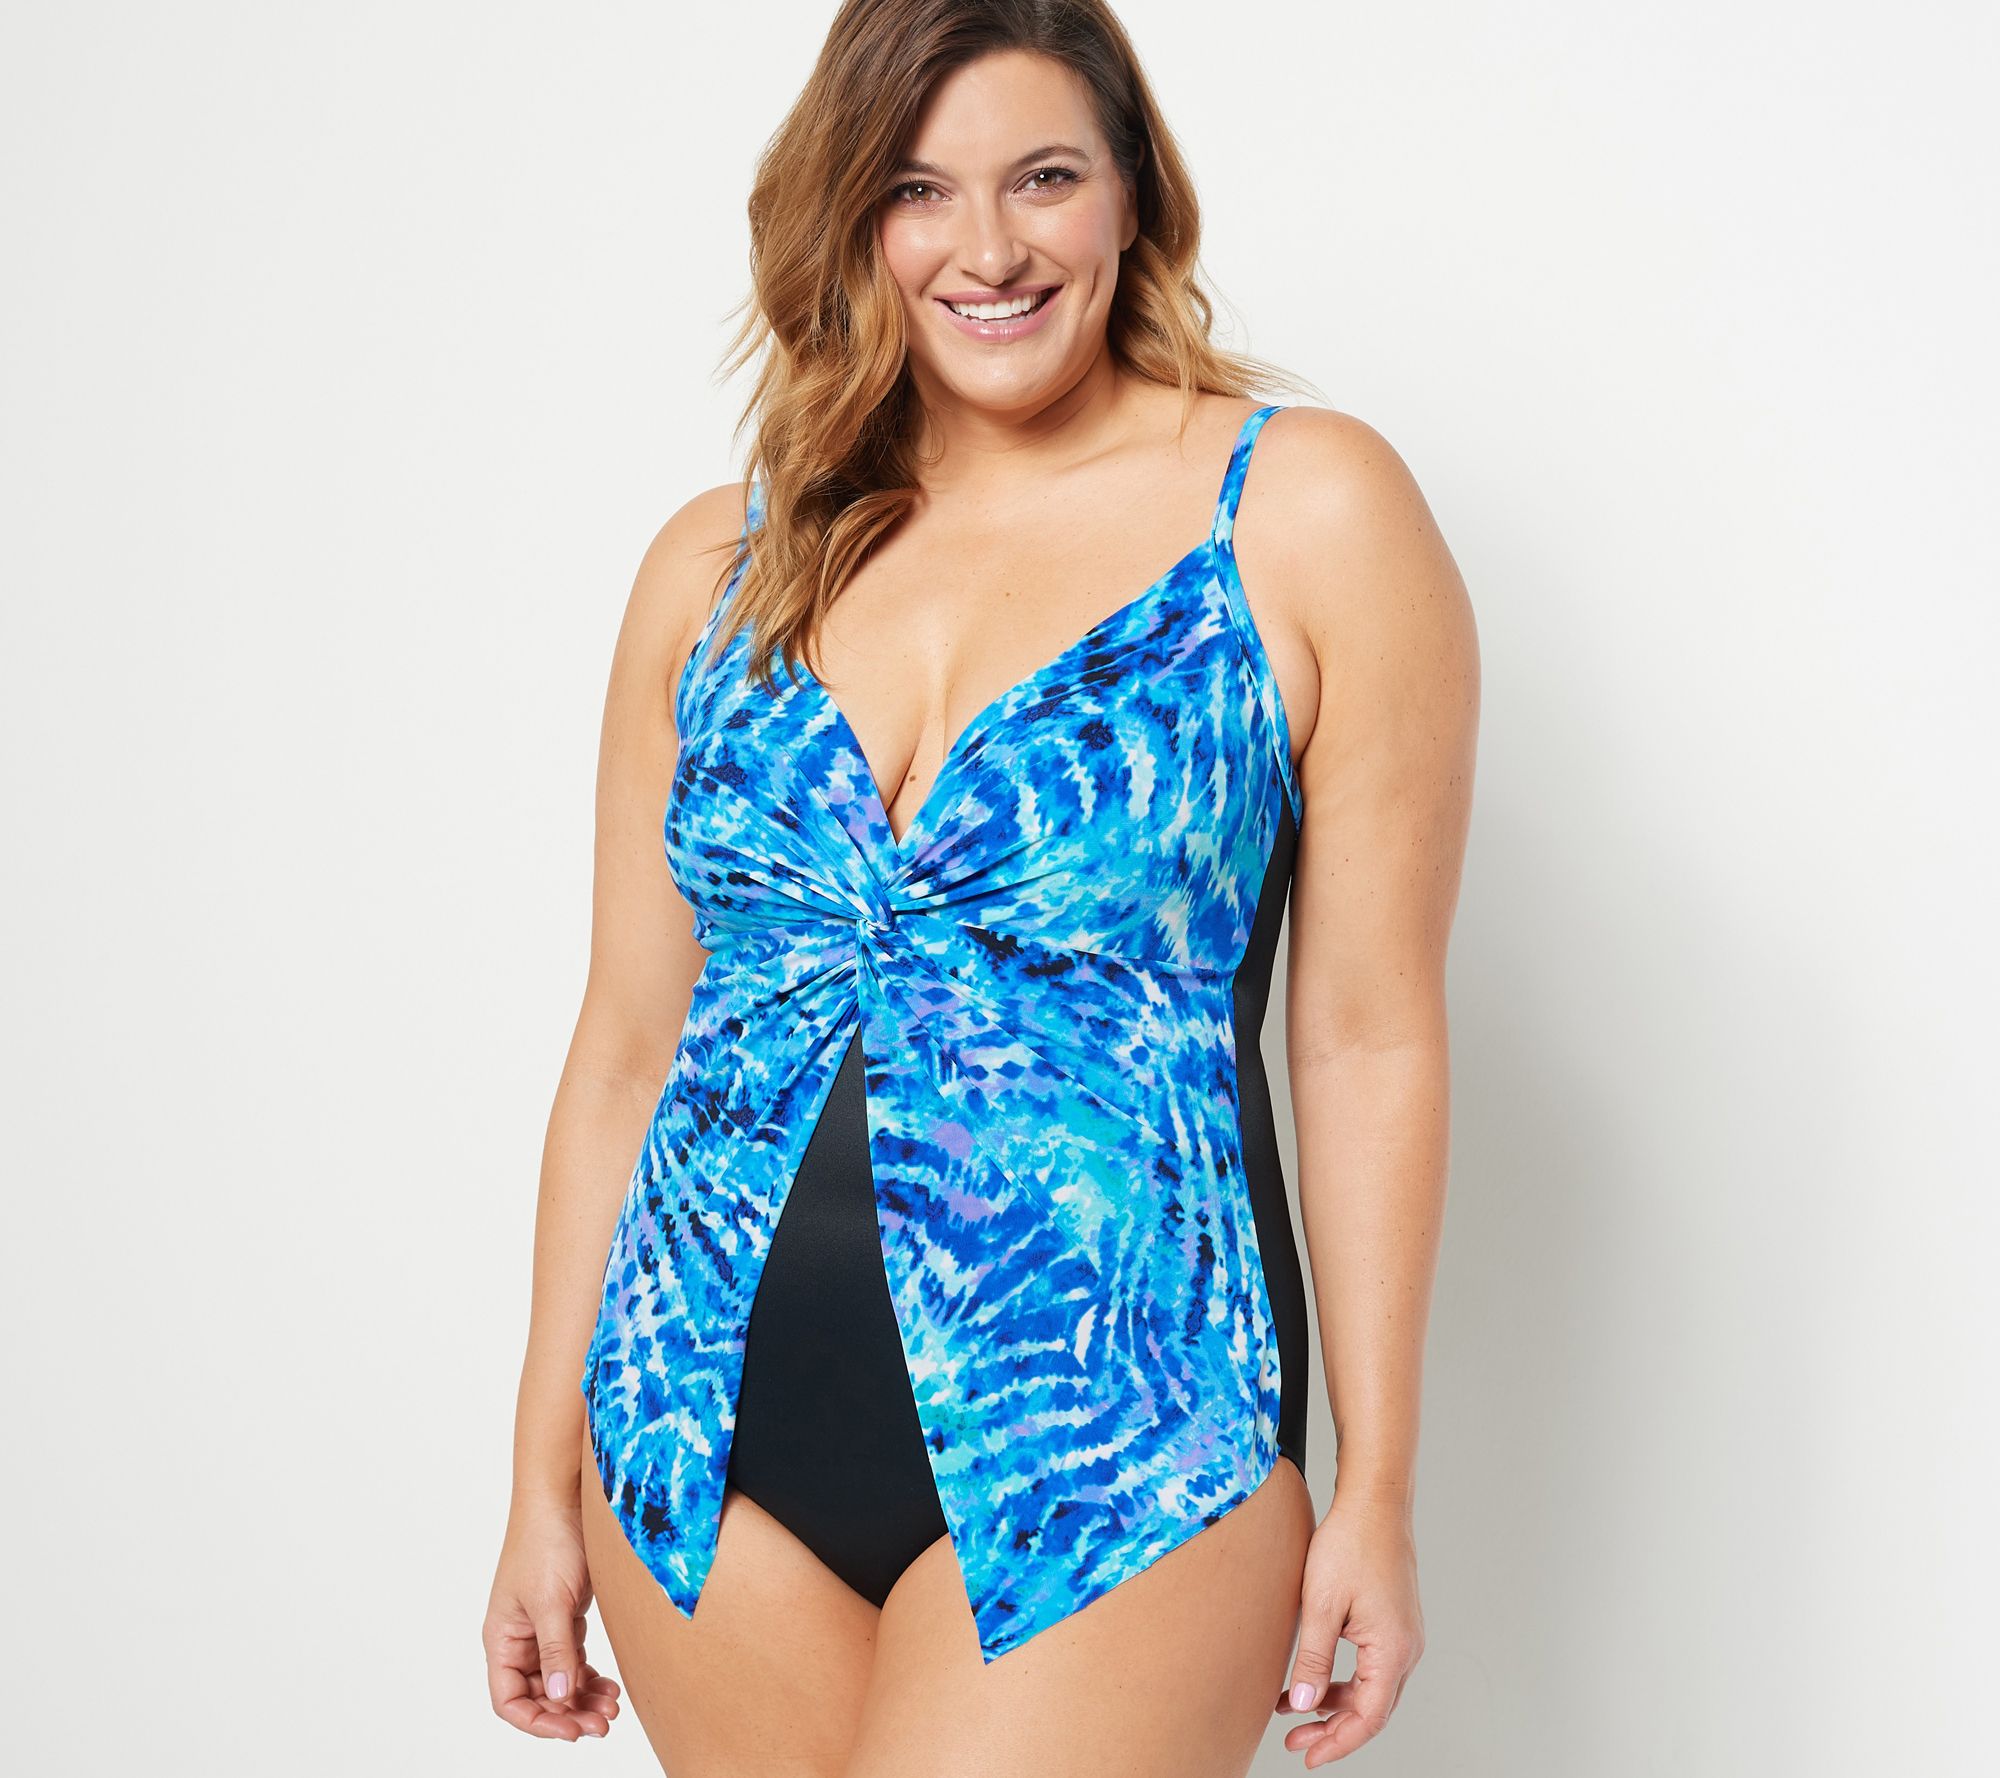 DreamShaper by Miracle Suit Daisy Mesh High Neck Tankini 